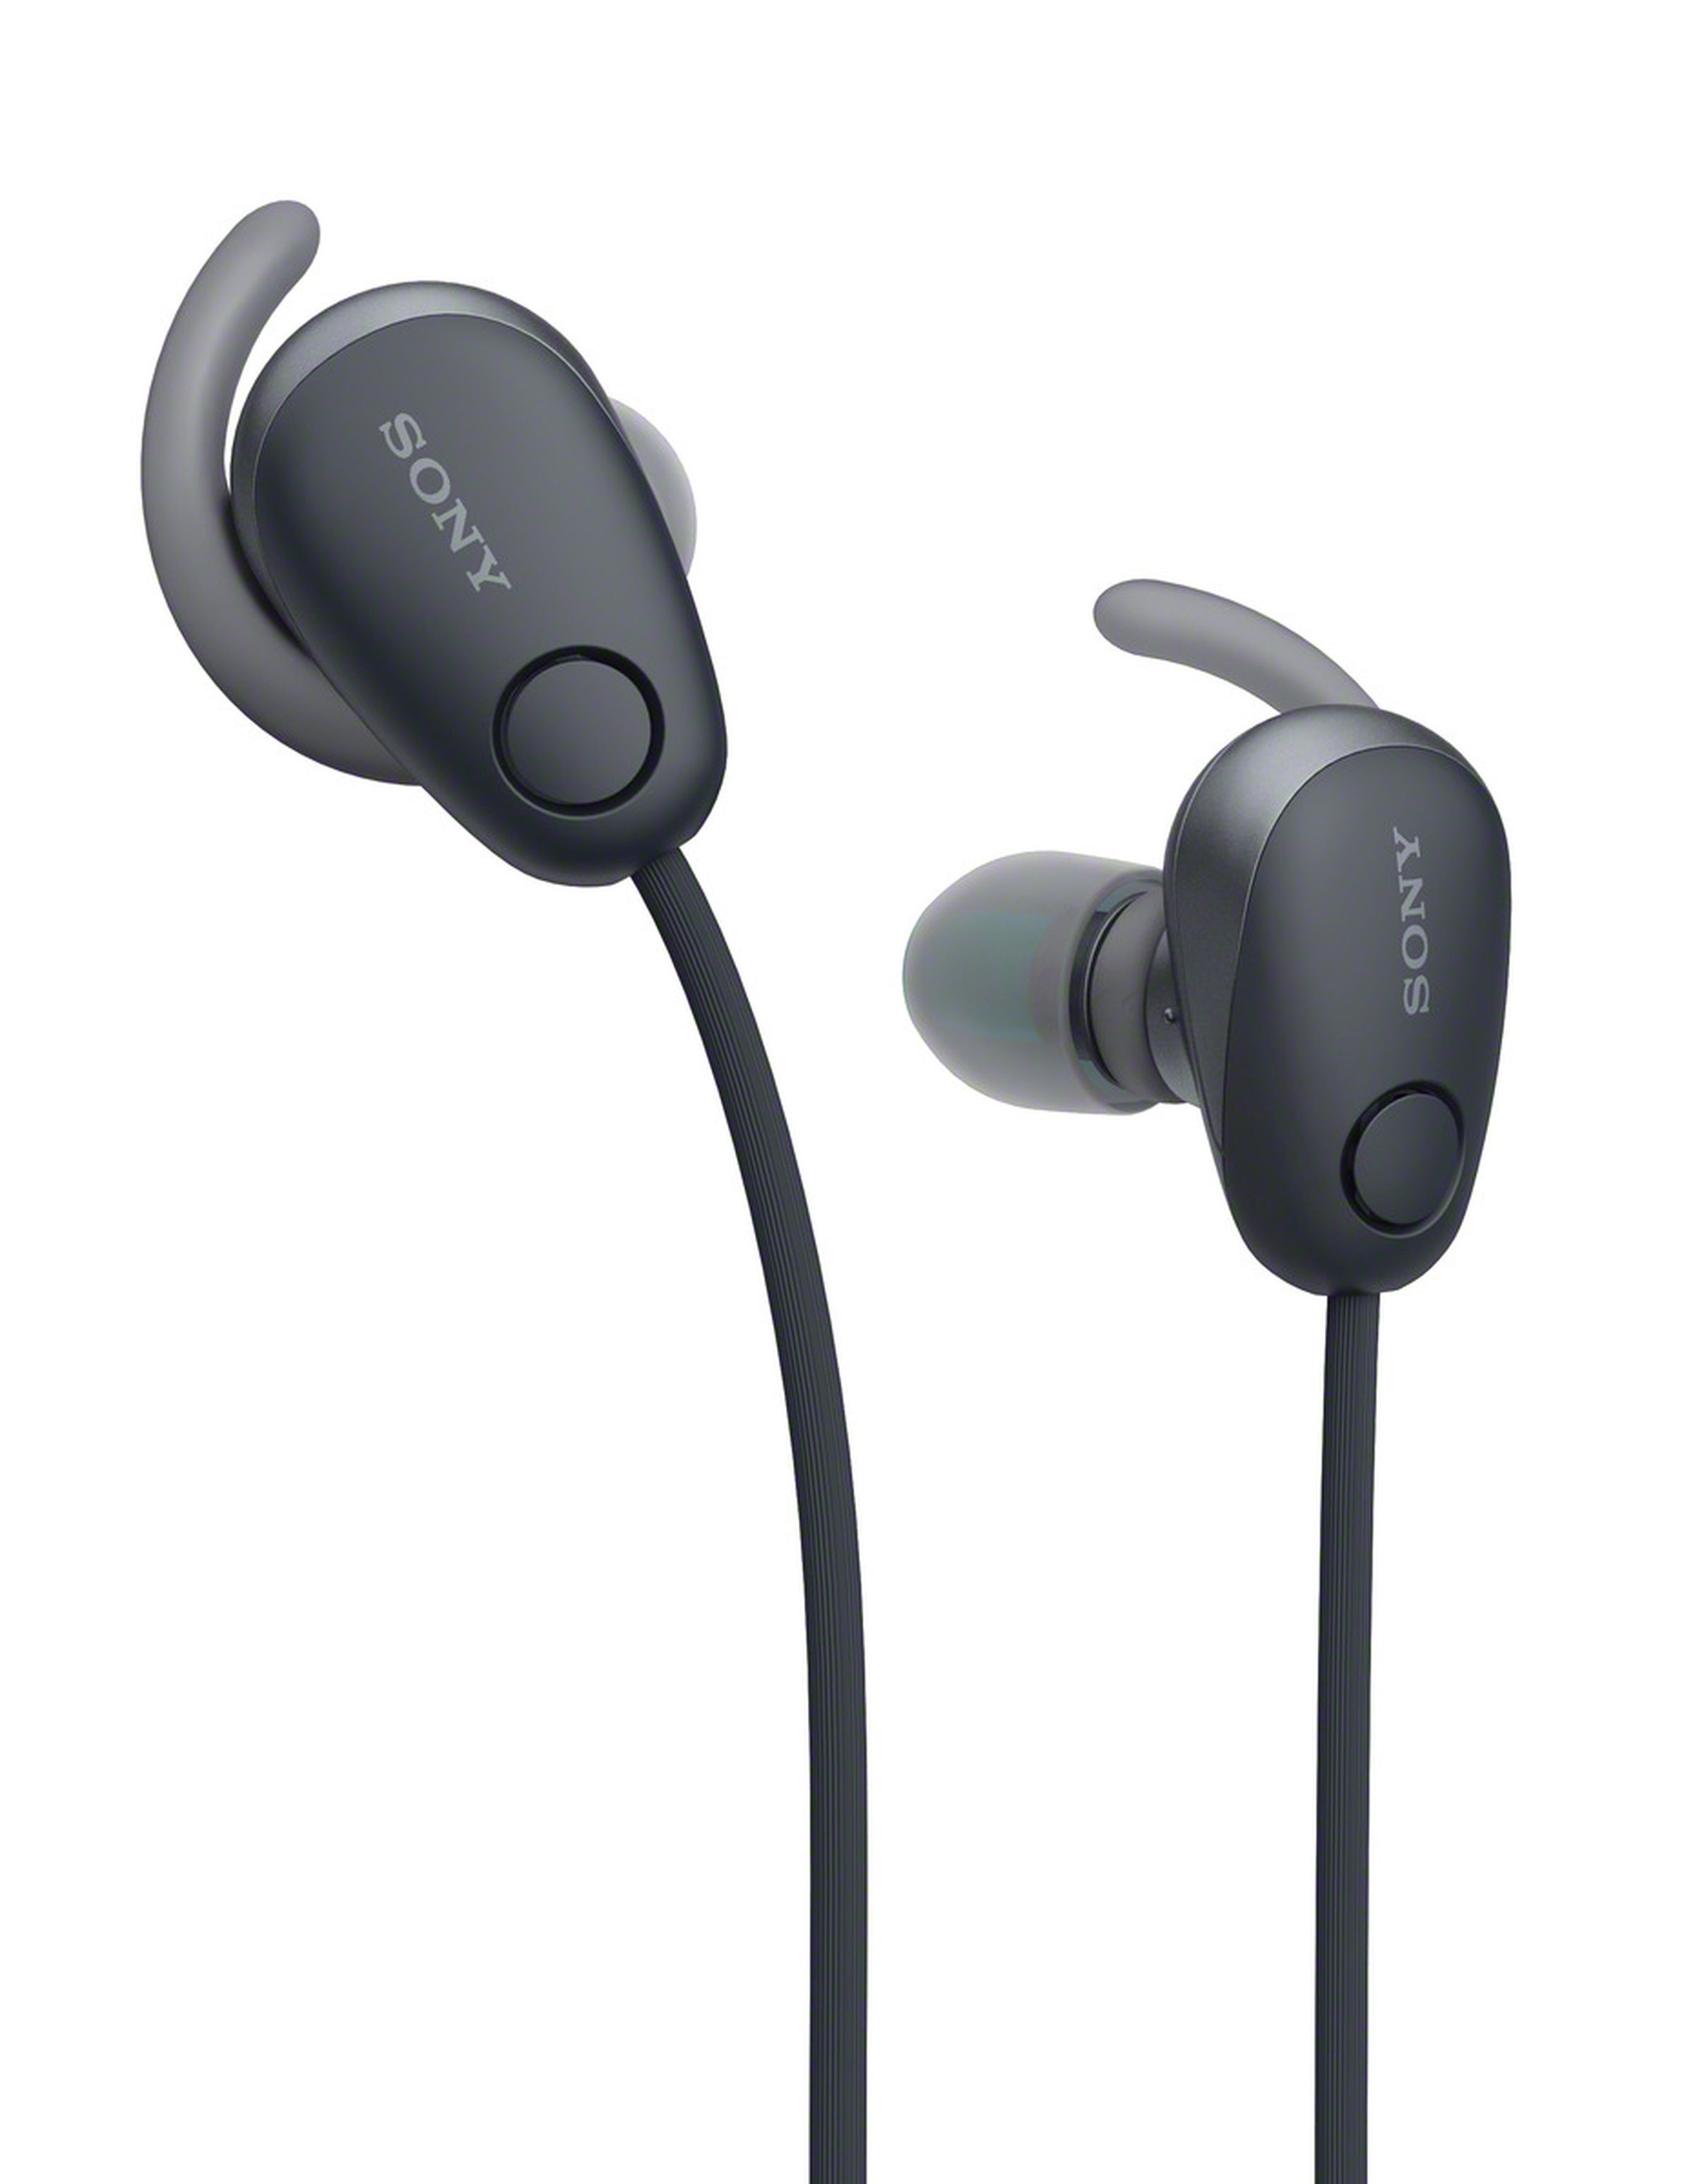 Sony’s WI-SP600N neckbuds feature noise cancellation and IPX4 sweat and water resistance. 